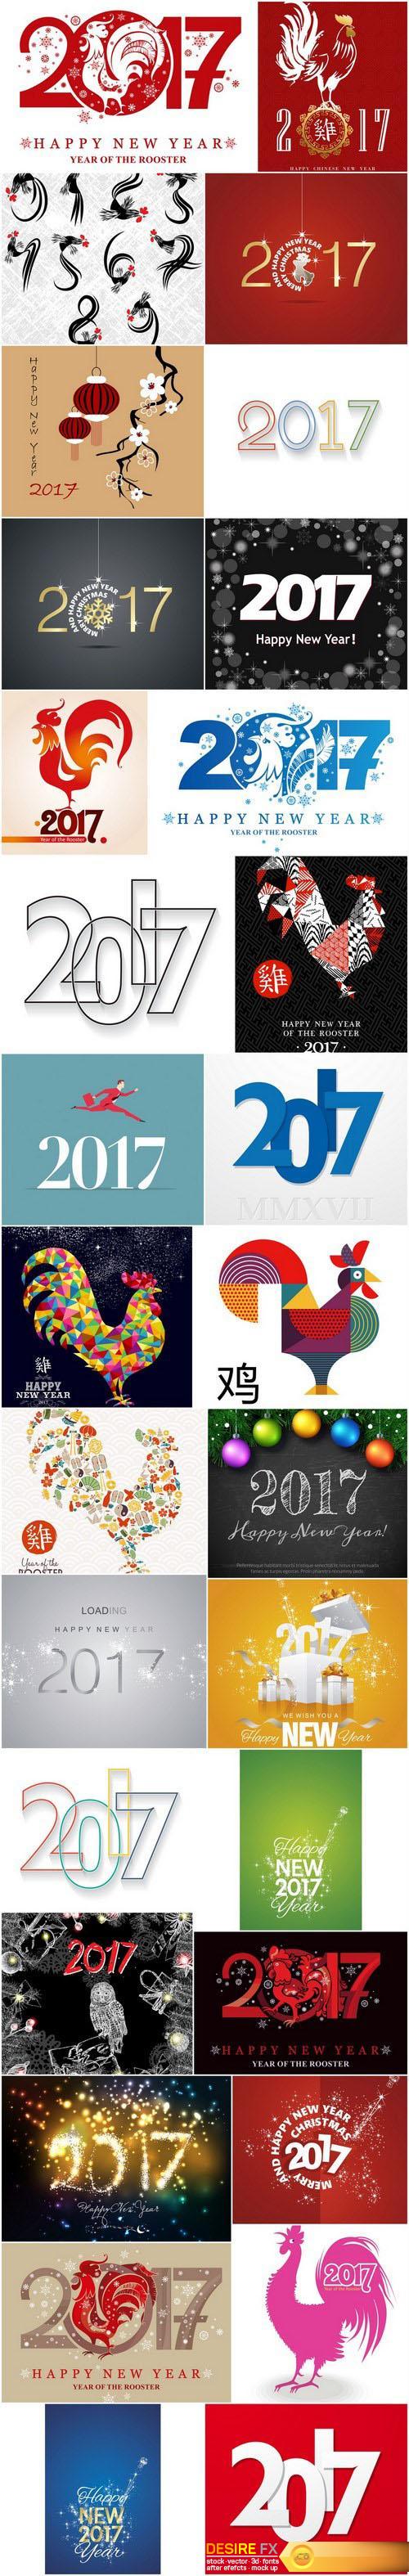 2017 - The Year of Fire Rooster - Set of 30xEPS Professional Vector Stock